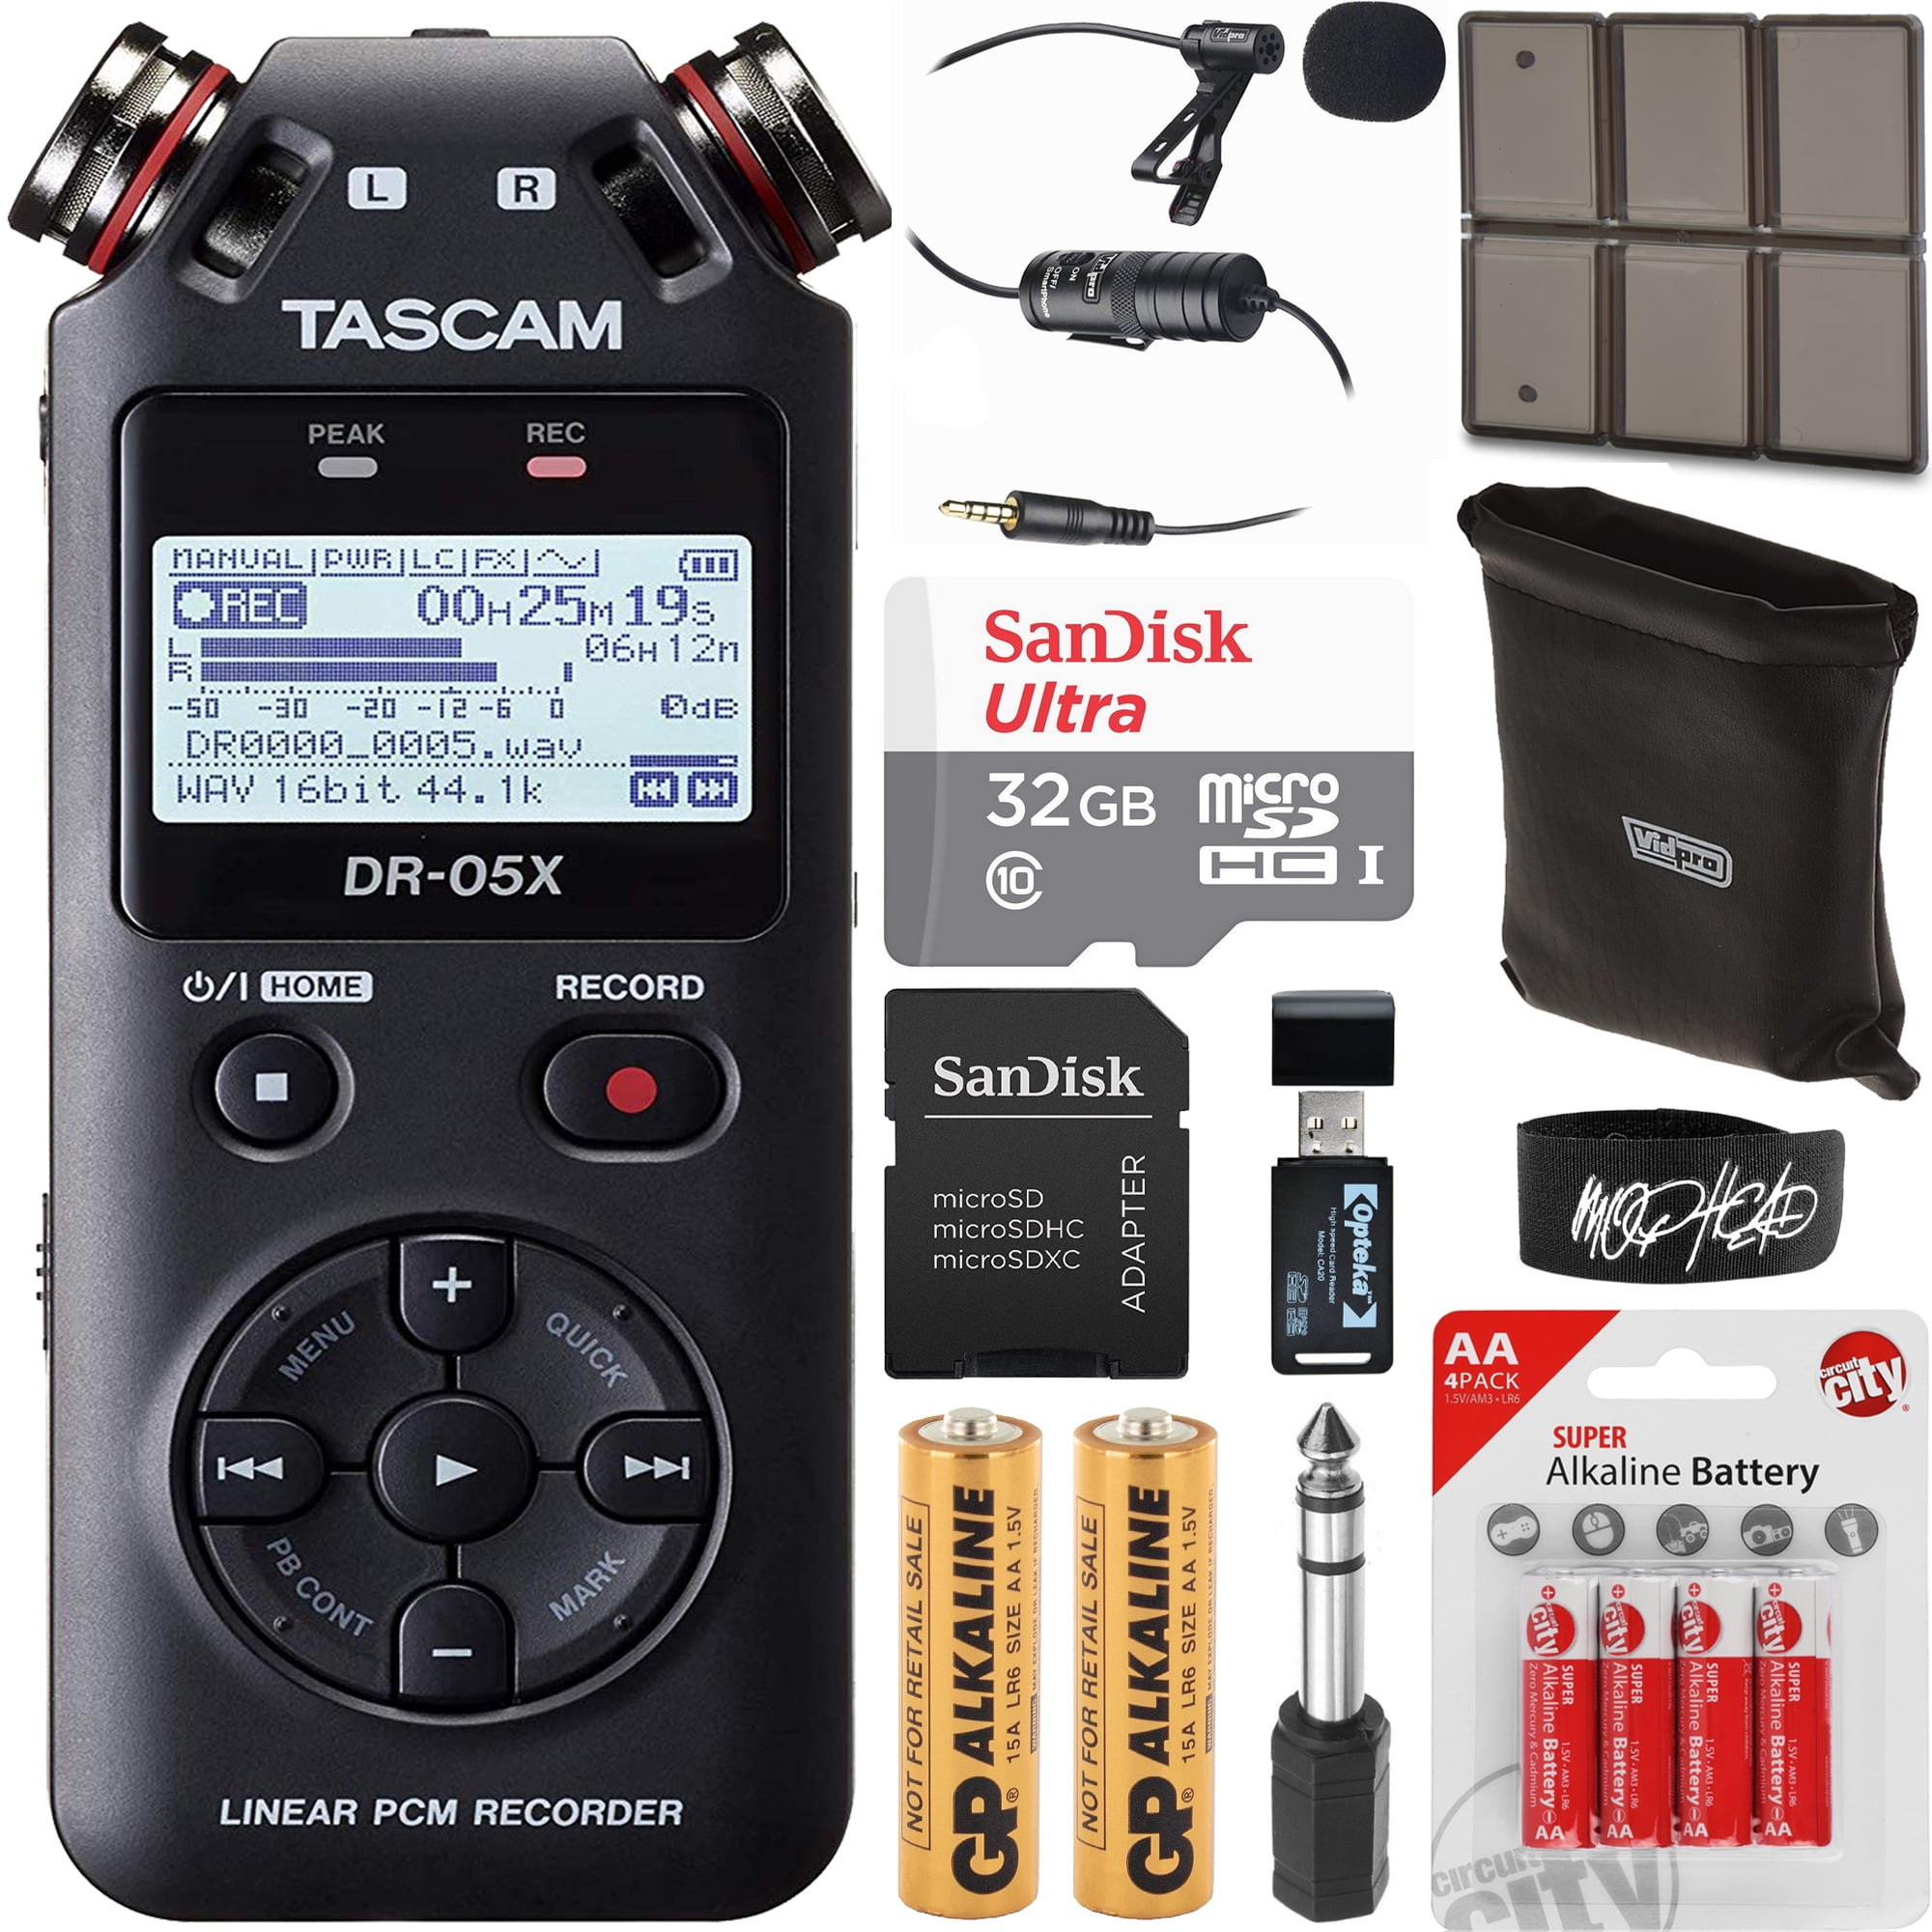 Tascam DR-05X Stereo Handheld Digital Audio Recorder USB Audio Interface  Bundle with 32GB Memory Card, Lapel Microphone, AA Batteries, Cable Tie,  Card